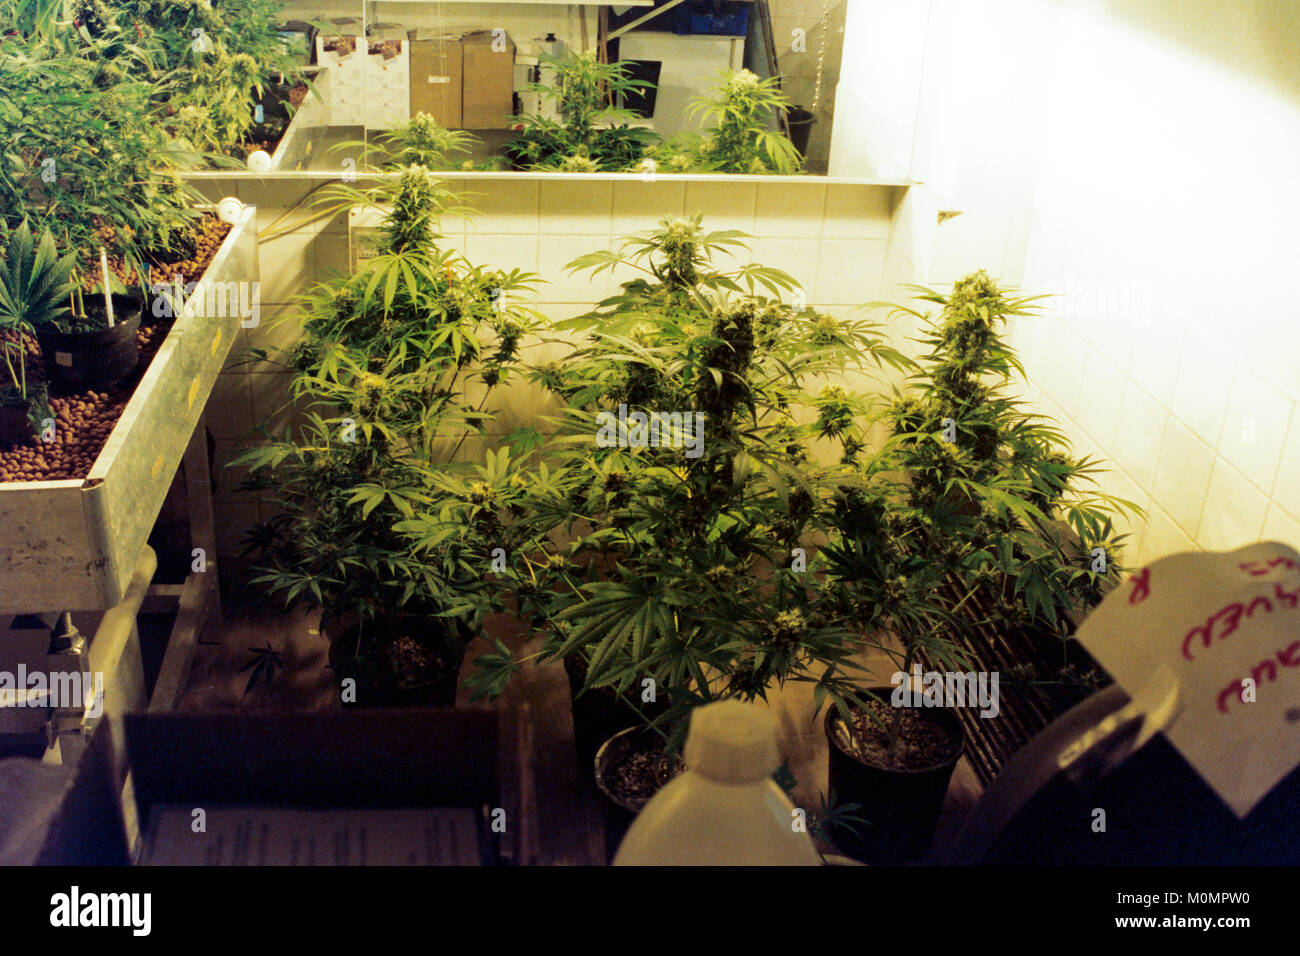 Cannabis plants growing at the museum of marijuana in Amsterdam, Netherlands. Stock Photo